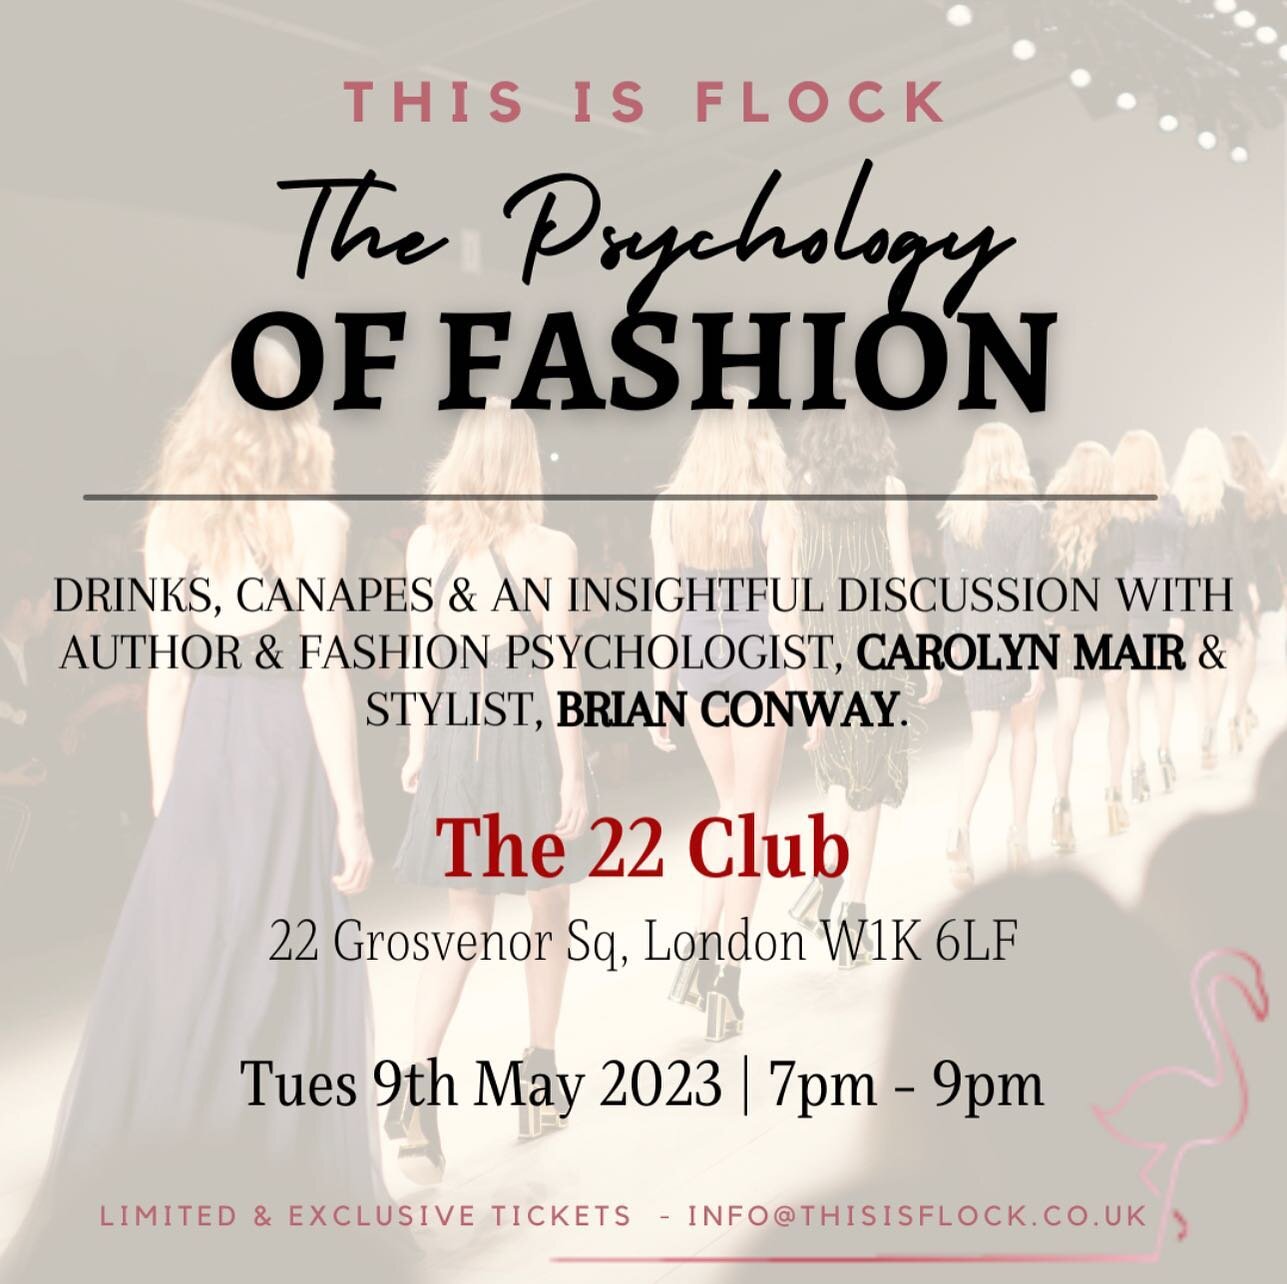 📢Thrilled to partner with The Twenty Two on this one.👇🏽🤩

Flock brings you this insightful discussion with fashion psychologist, Carolyn Mair and stylist, Brian Conway. 

This will be a highly engaging event with drinks, canap&eacute;s and expert